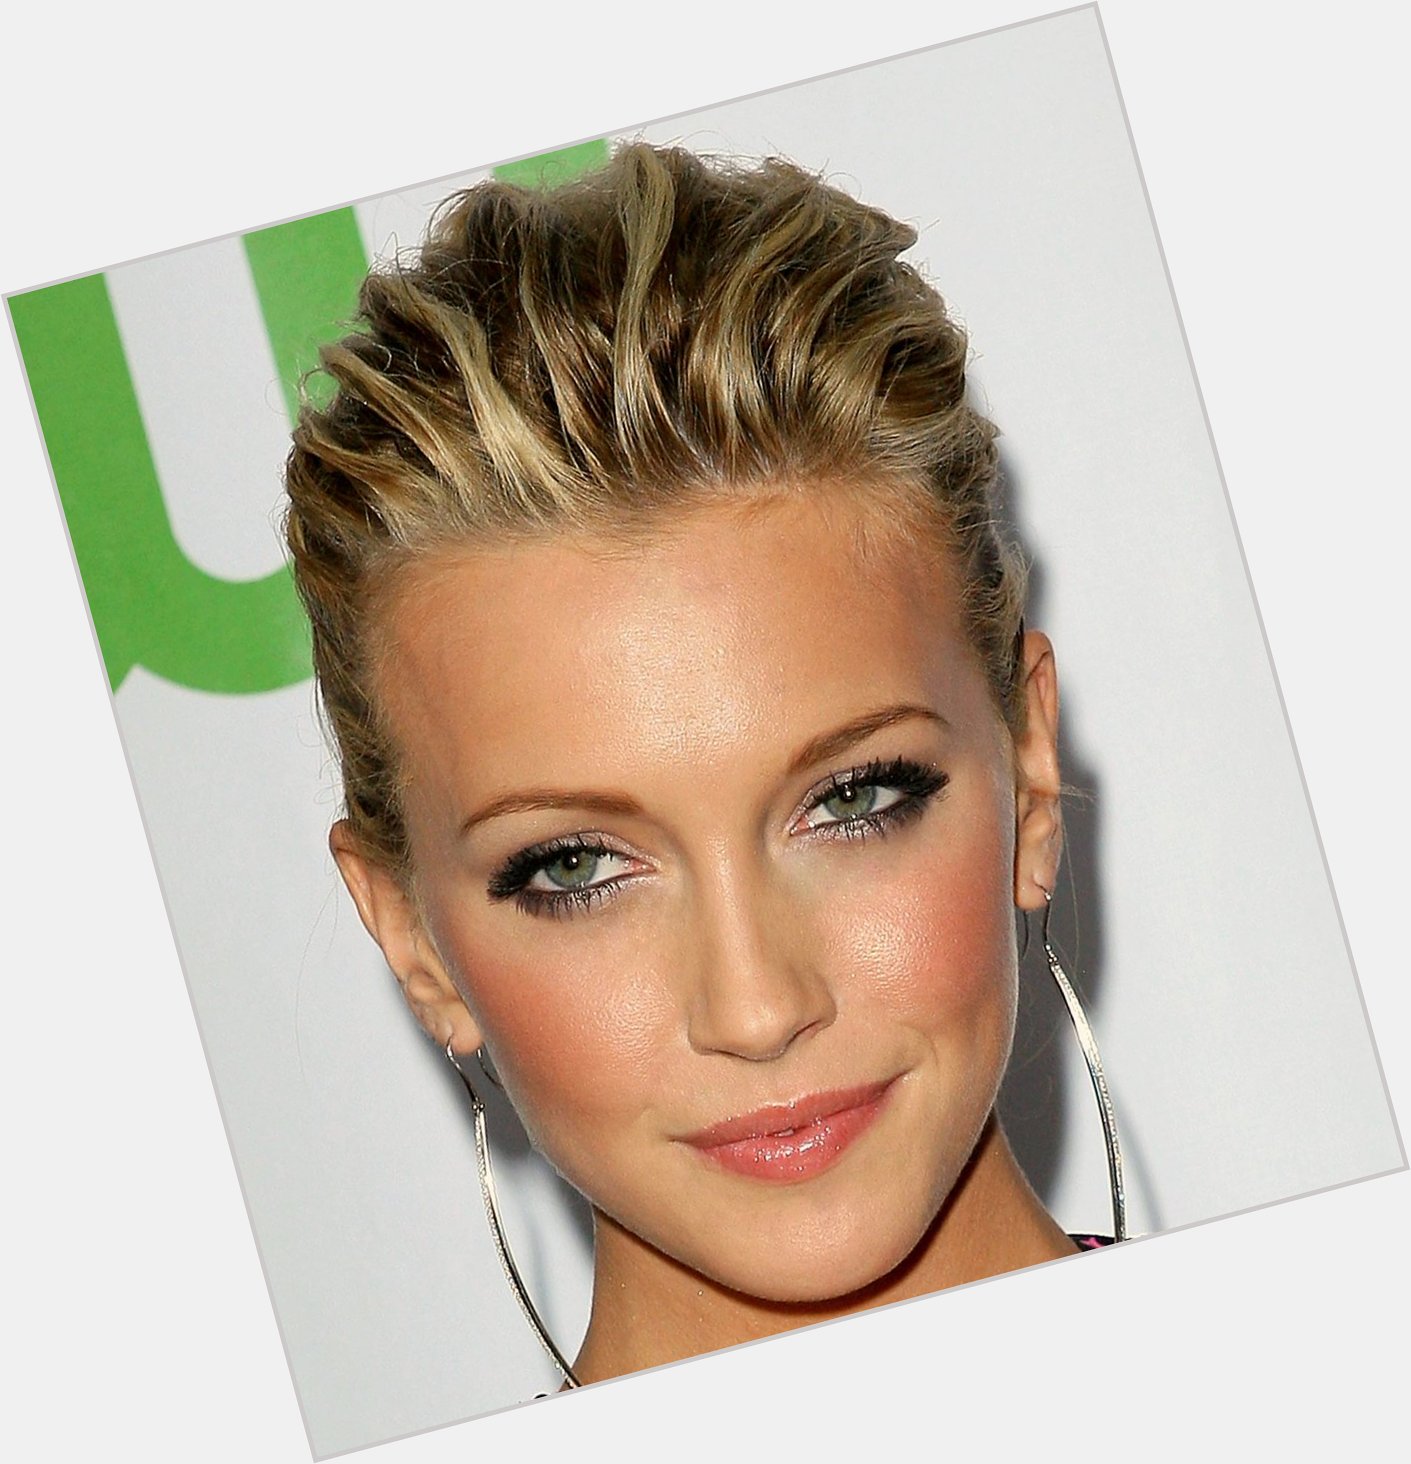 Katie Cassidy November 25 Sending Very Happy  Birthday Wishes! All the Best! 